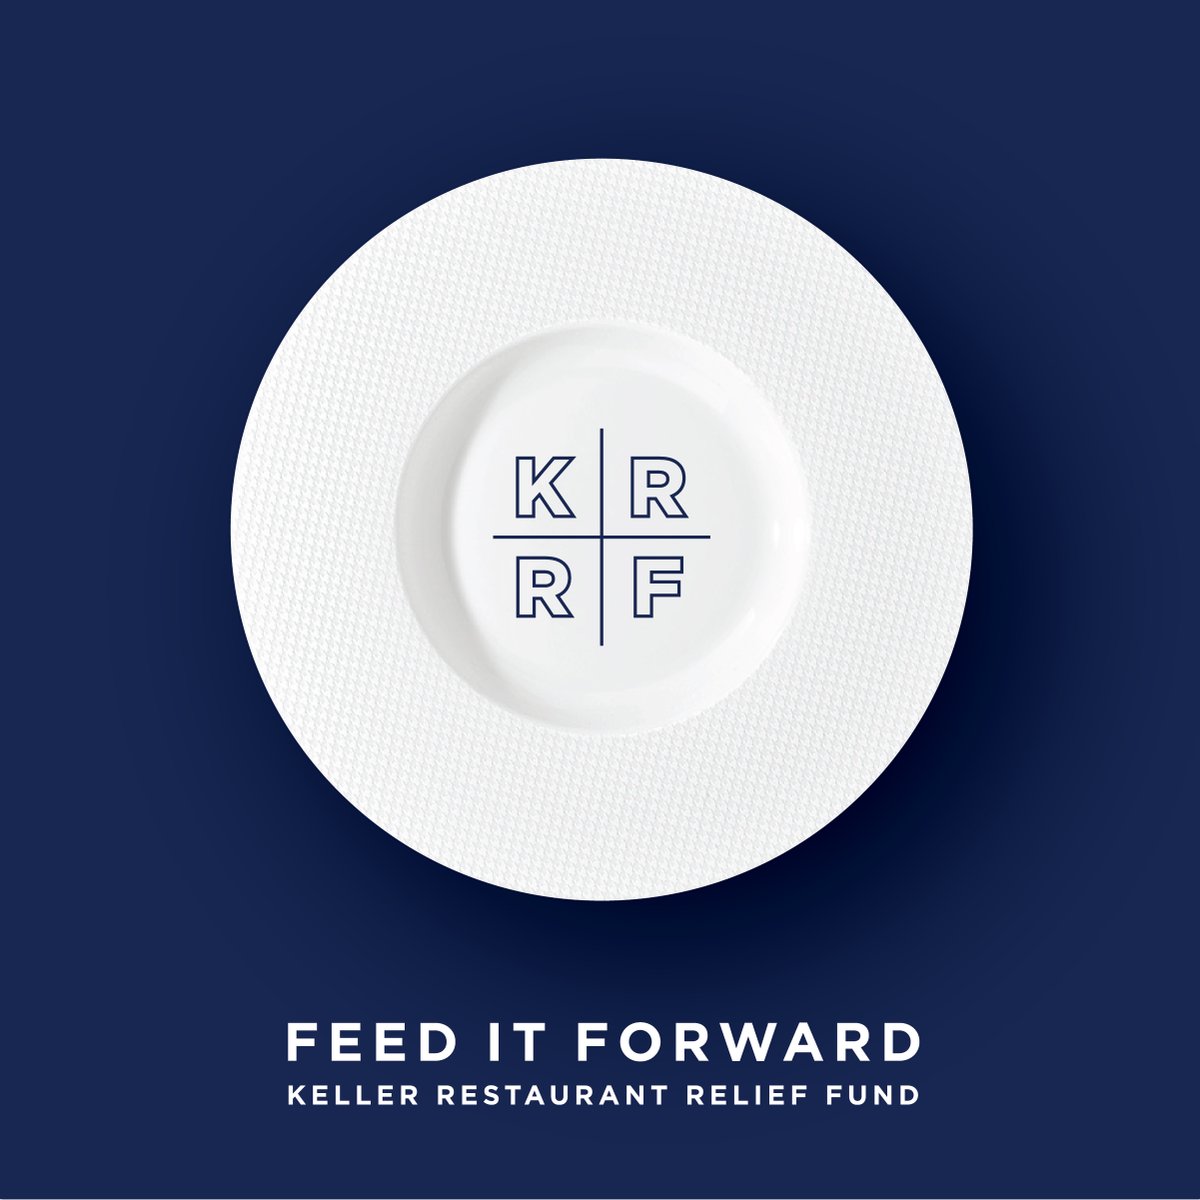 We have launched the KELLER RESTAURANT RELIEF FUND, a not-for-profit charitable organization aimed at helping our employees who are impacted by the COVID-19 pandemic. Thank you for your support. We are so grateful. Feed it forward! DONATE: thomaskeller.com/donate